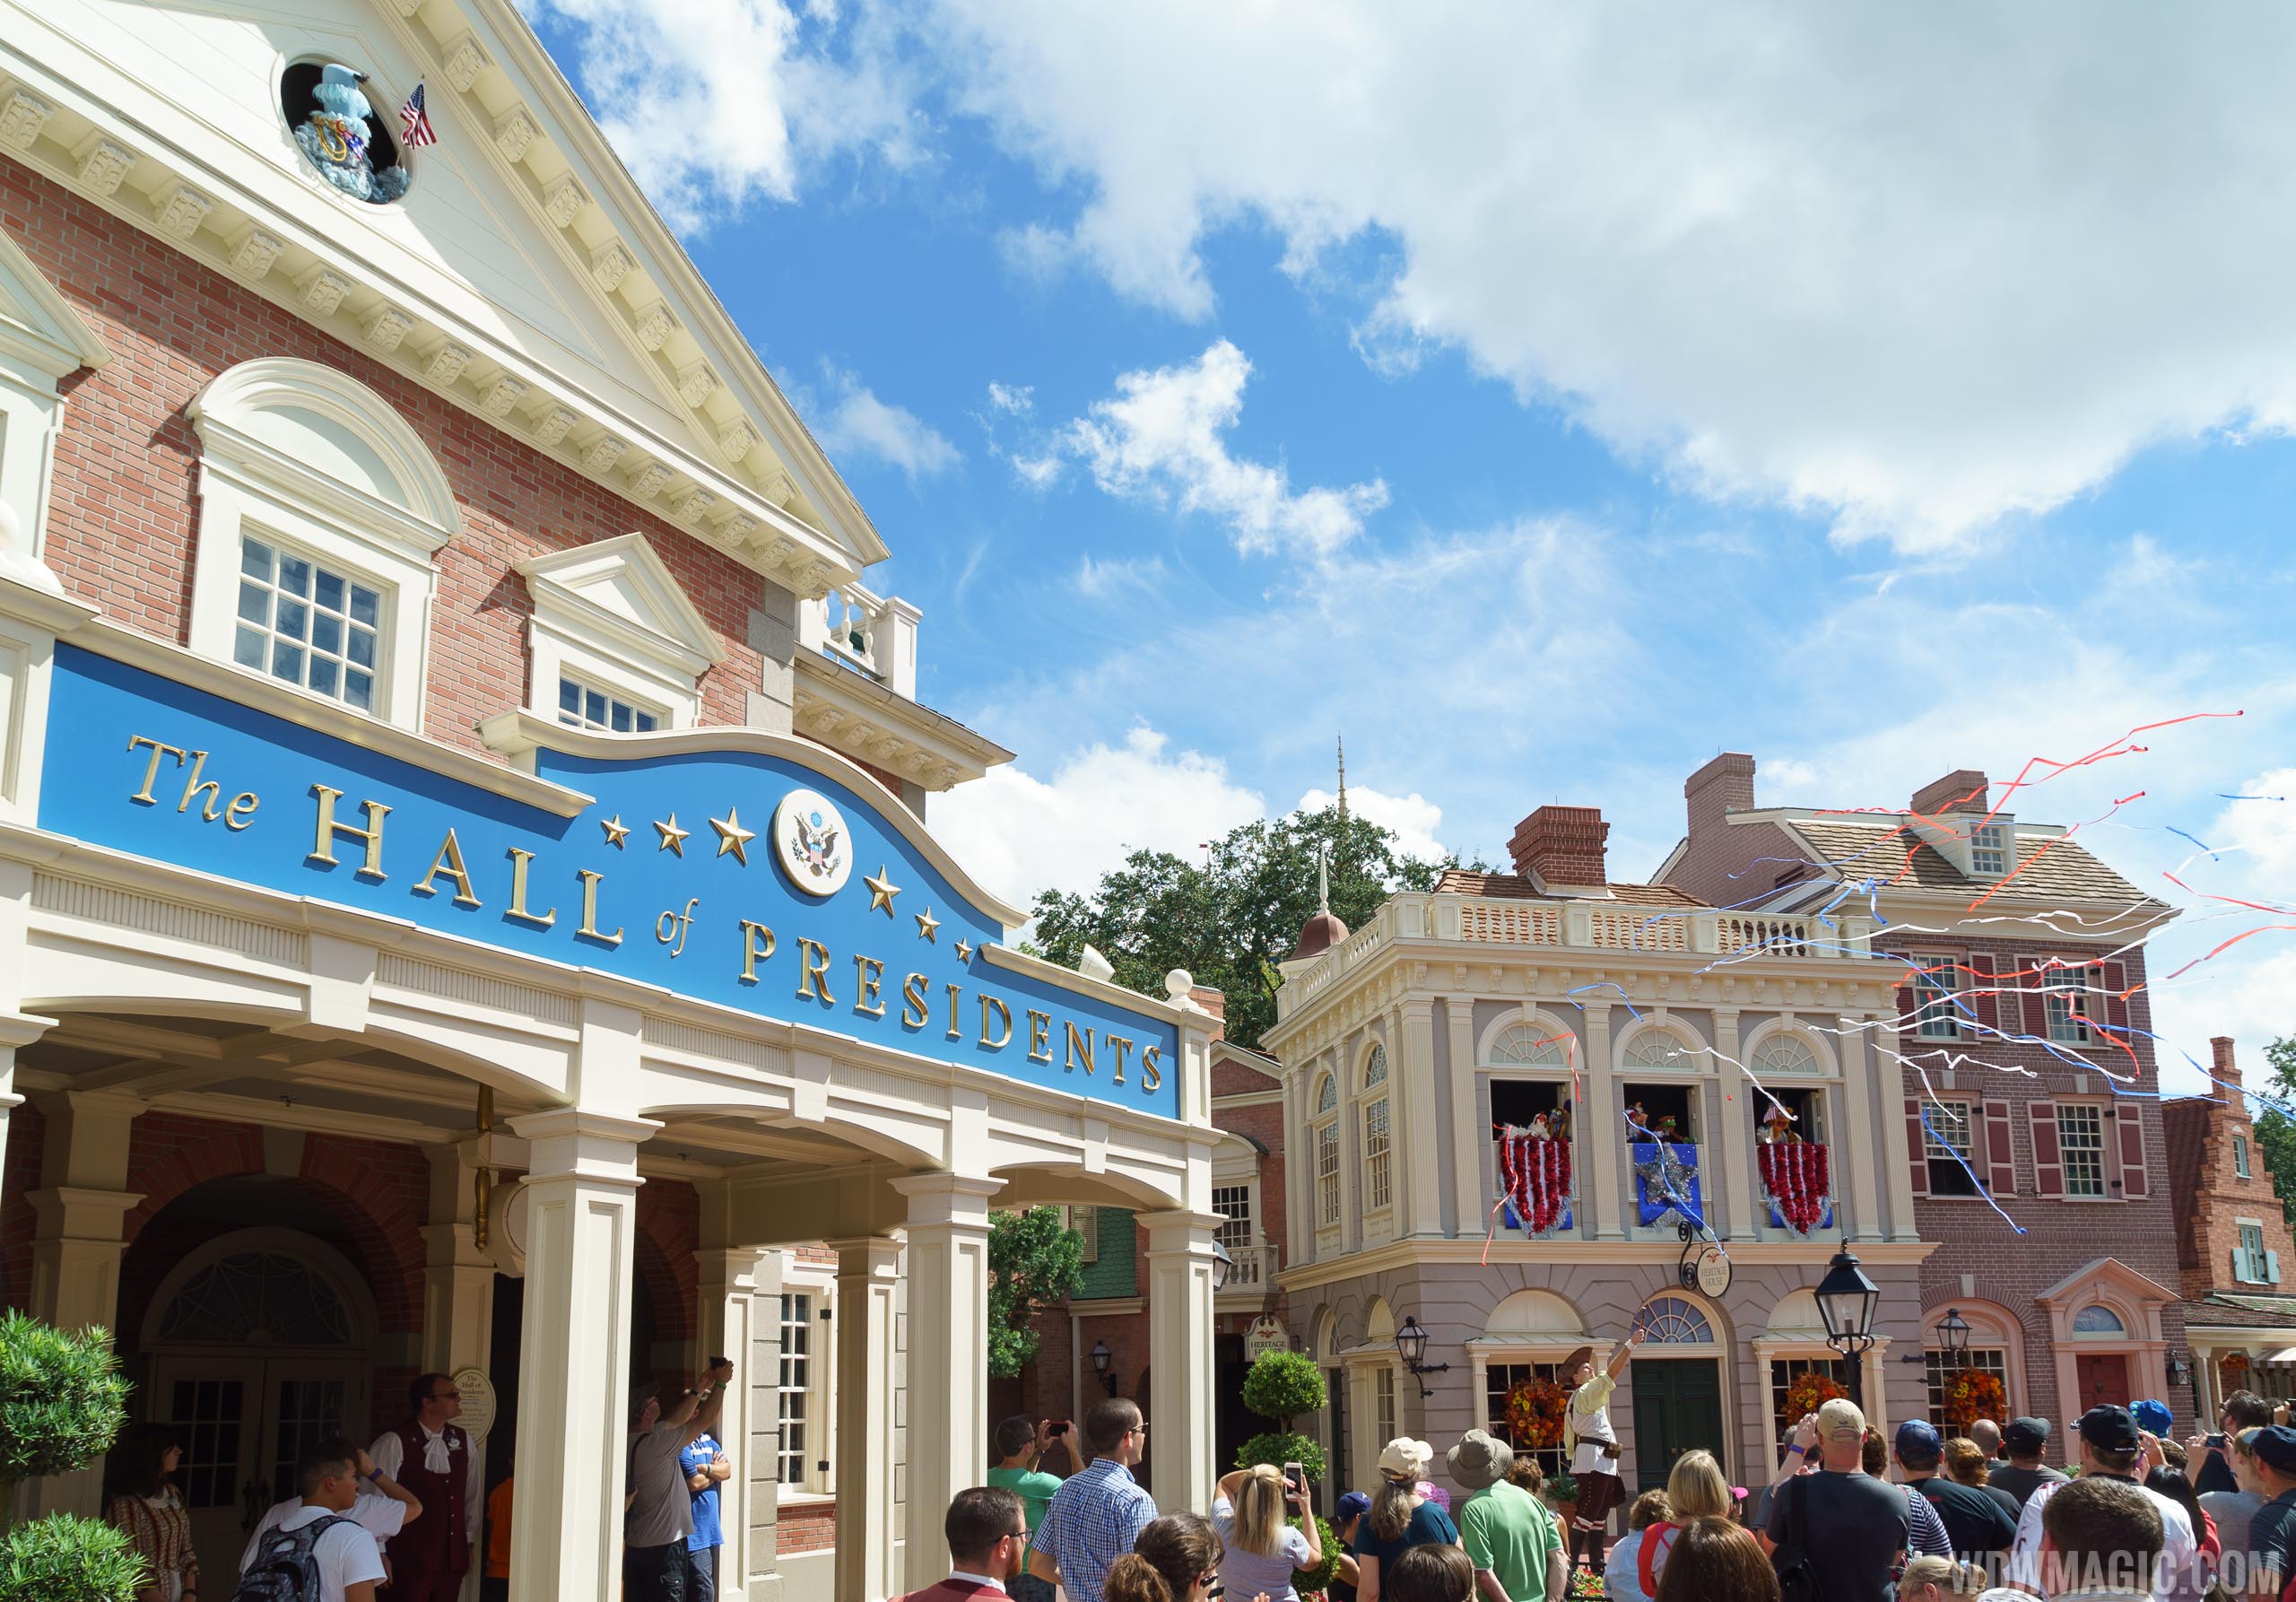 Are the Muppets about to takeover the Hall of Presidents?